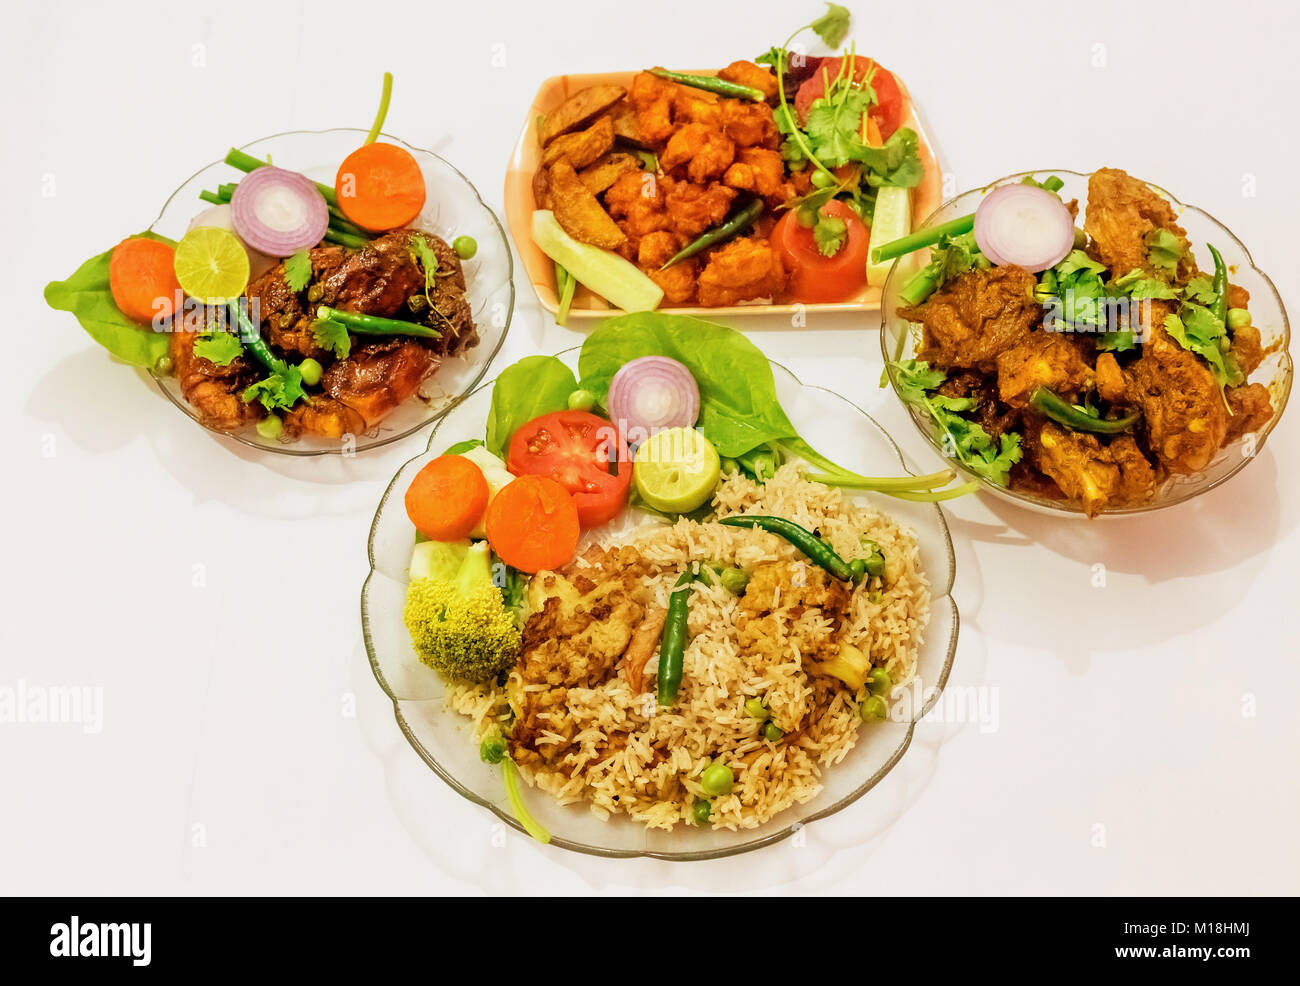 Spicy Indian non vegetarian food comprising of fried rice, deep fried spicy prawn, chicken boneless fry and chicken pakora. Stock Photo